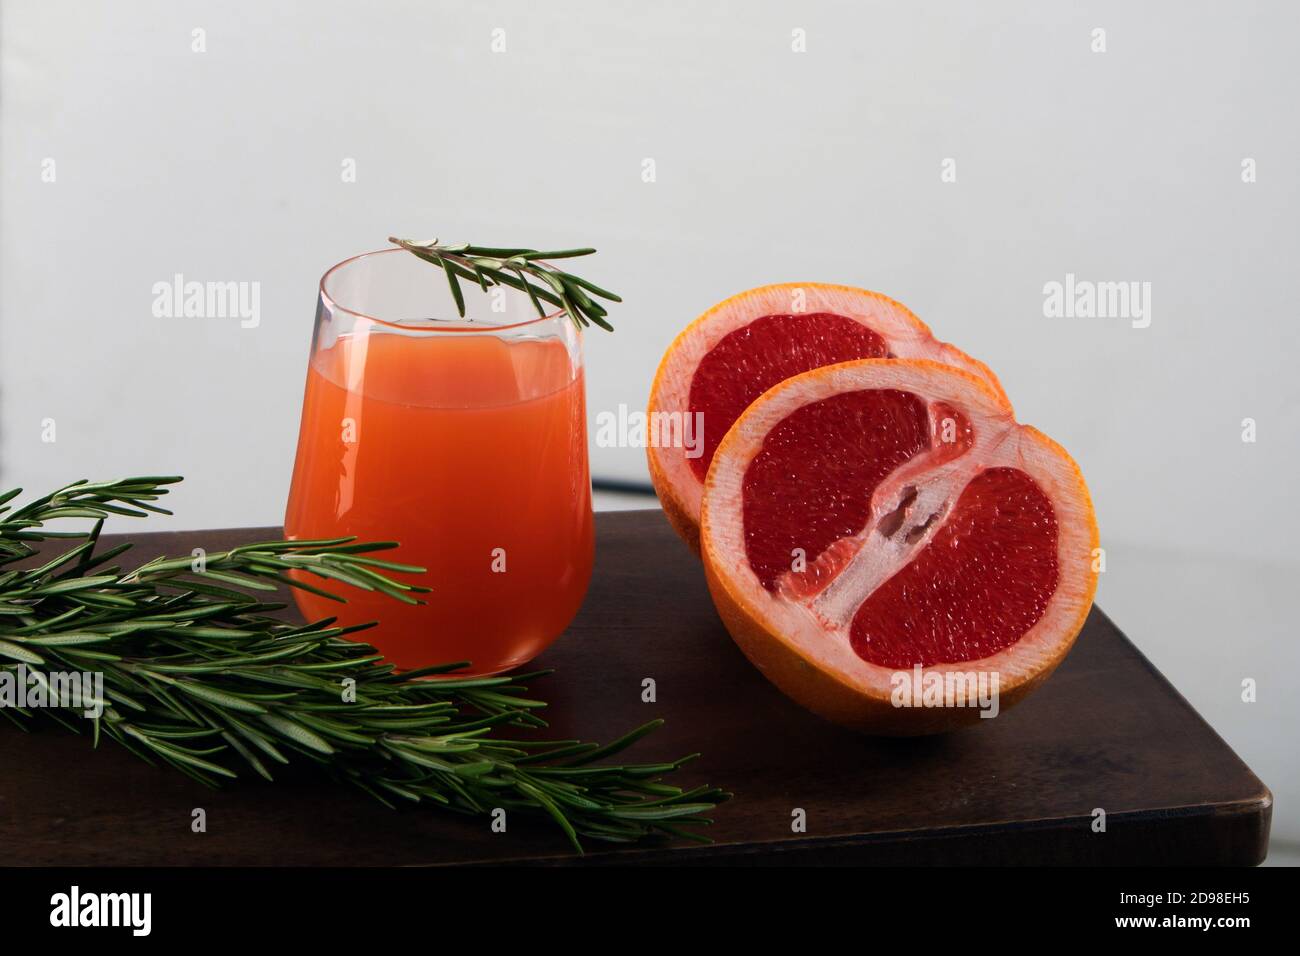 Two halves of red orange, rosemary sprig and glass of orange juice lying on a wooden table against light background Stock Photo